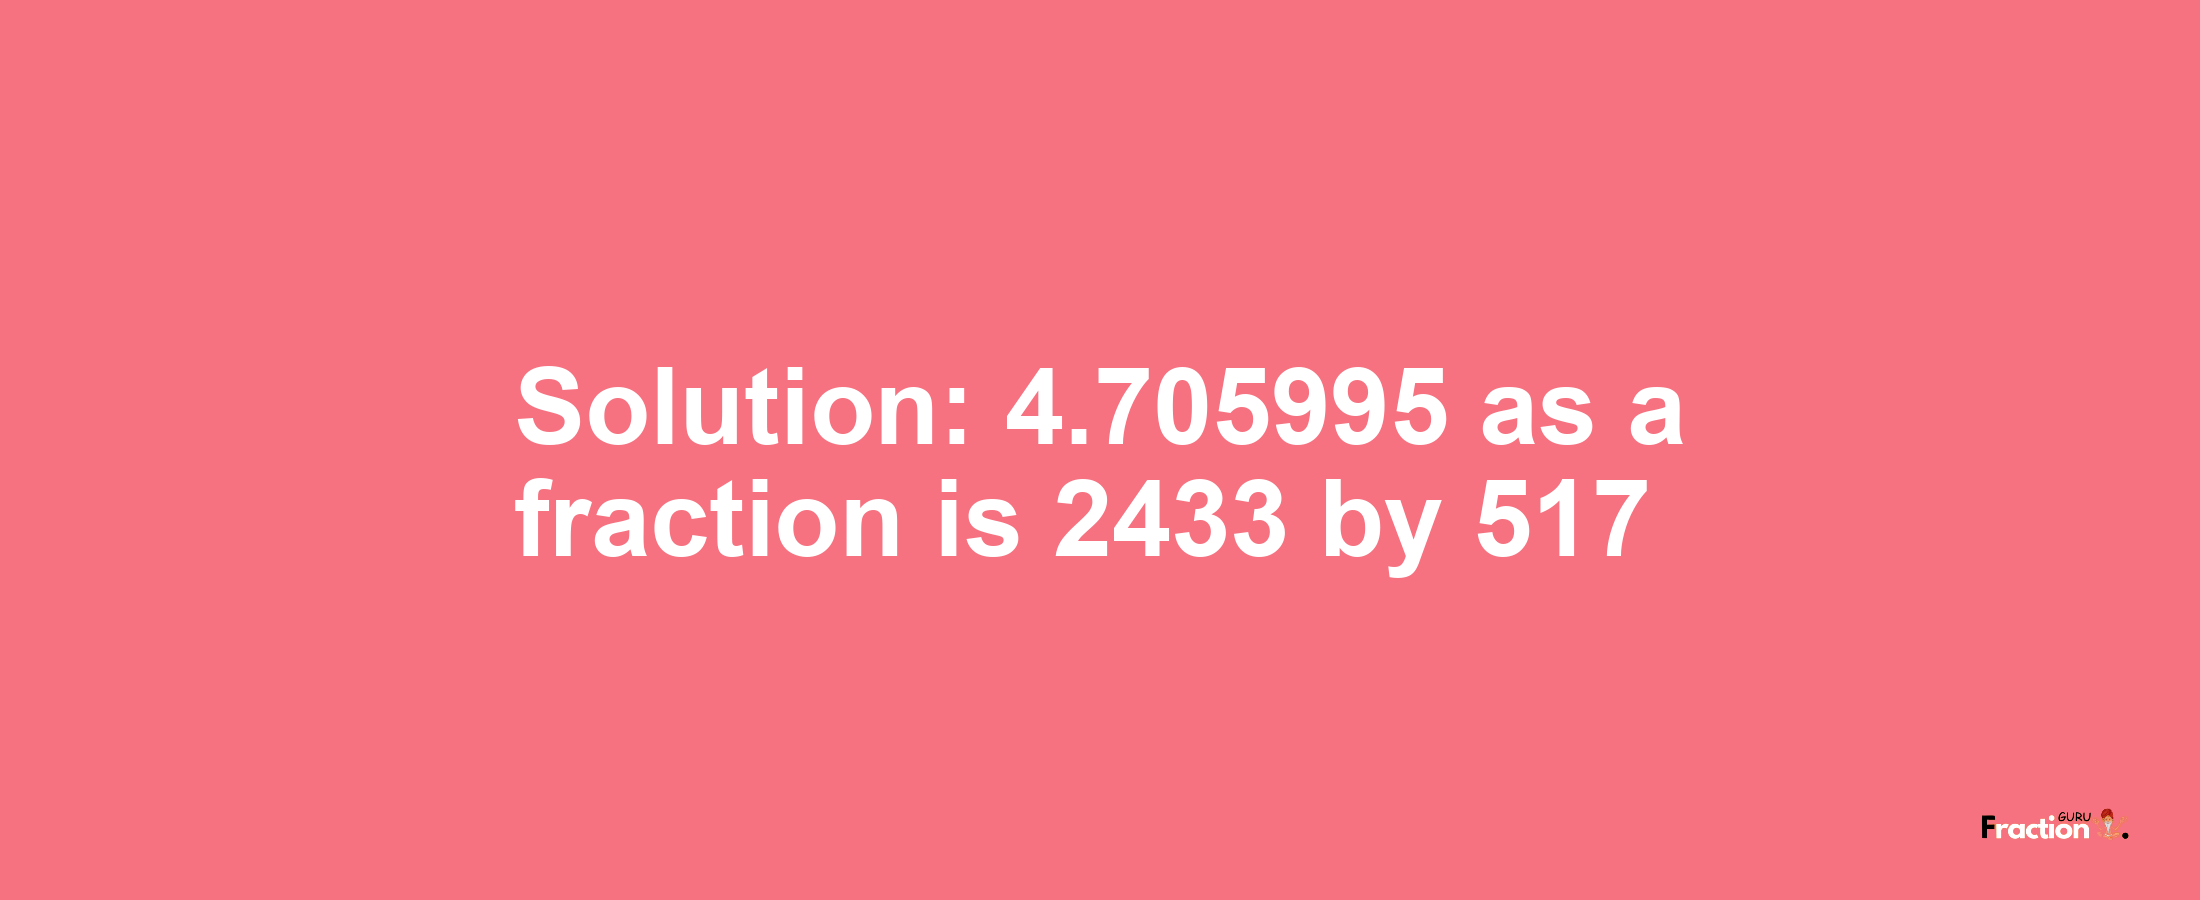 Solution:4.705995 as a fraction is 2433/517